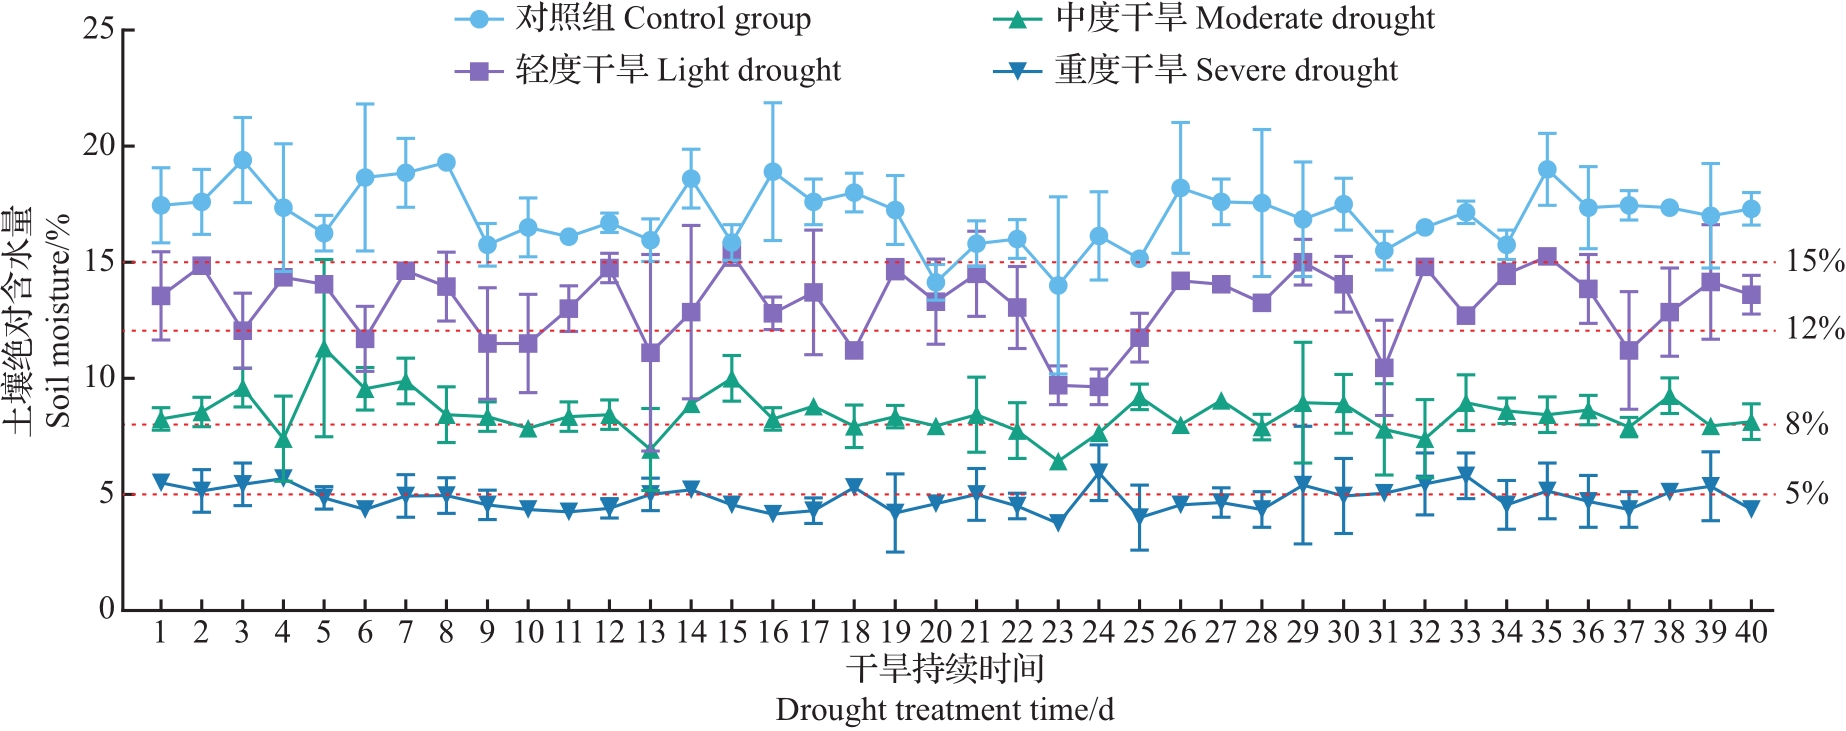 strong>Effects of different degrees of drought stress on plants 